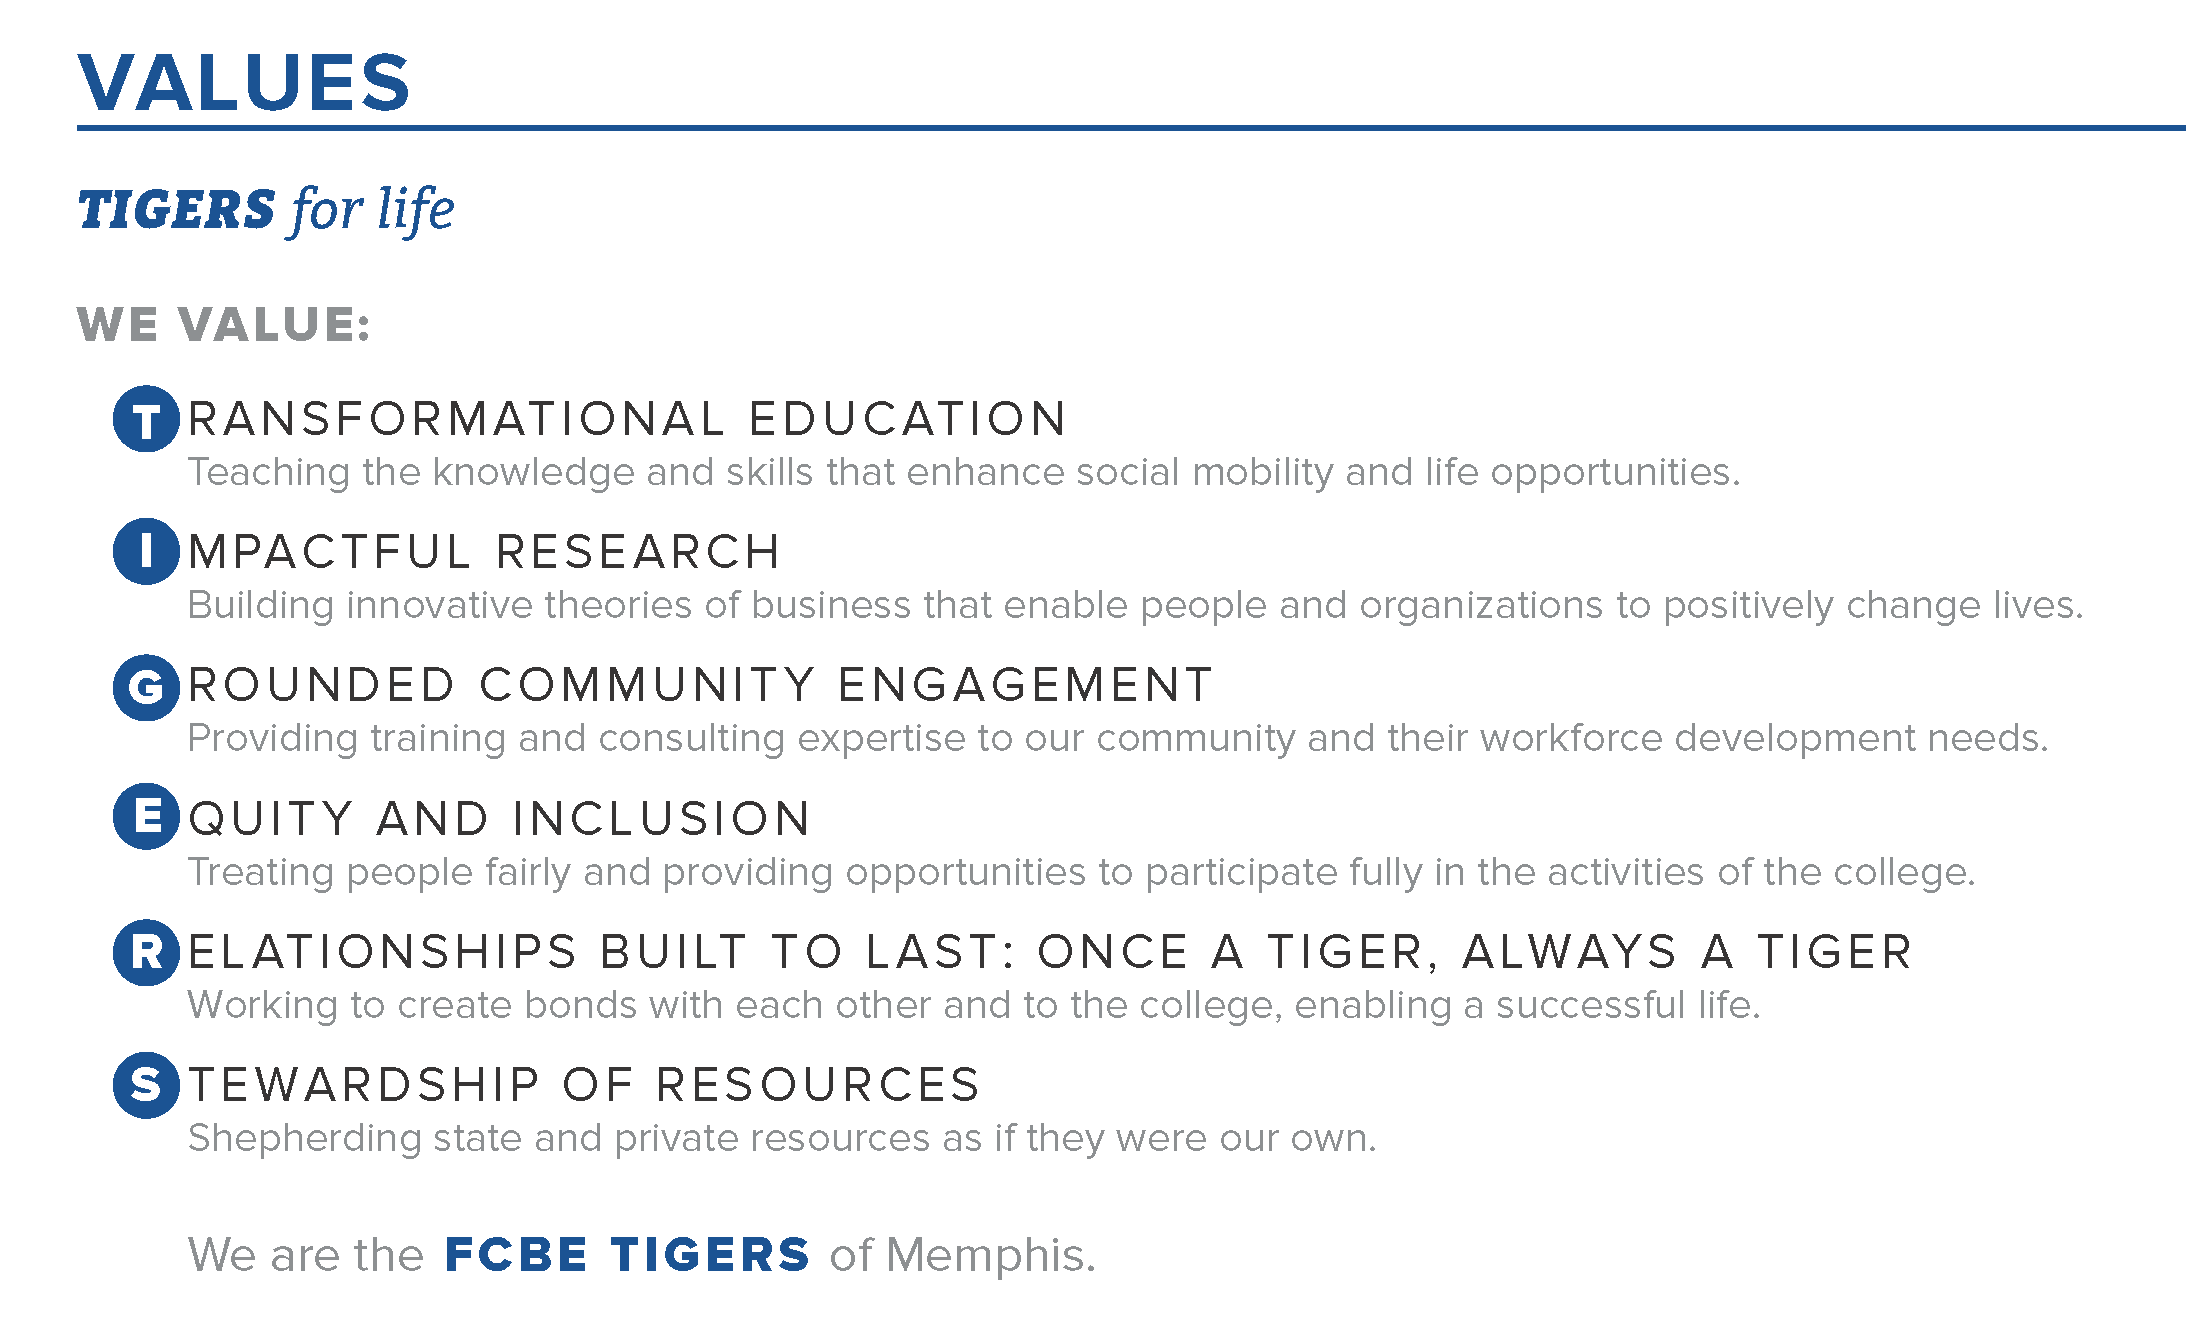 VALUES. As Tigers for life, we value: TRANSFORMATIONAL EDUCATION - Teaching the knowledge and skills that enhance social mobility and life opportunities. IMPACTFUL RESEARCH - Building innovative theories of business that enable people and organizations to positively change lives. GROUNDED COMMUNITY ENGAGEMENT - Providing training and consulting expertise to our community and their workforce development needs. EQUITY AND INCLUSION - Treating people fairly and providing opportunities to participate fully in the activities of the college. RELATIONSHIPS BUILT TO LAST: ONCE A TIGER, ALWAYS A TIGER - Working to create bonds with each other and to the college, enabling a successful life. STEWARDSHIP OF RESOURCES - Shepherding state and private resources as if they were our own.